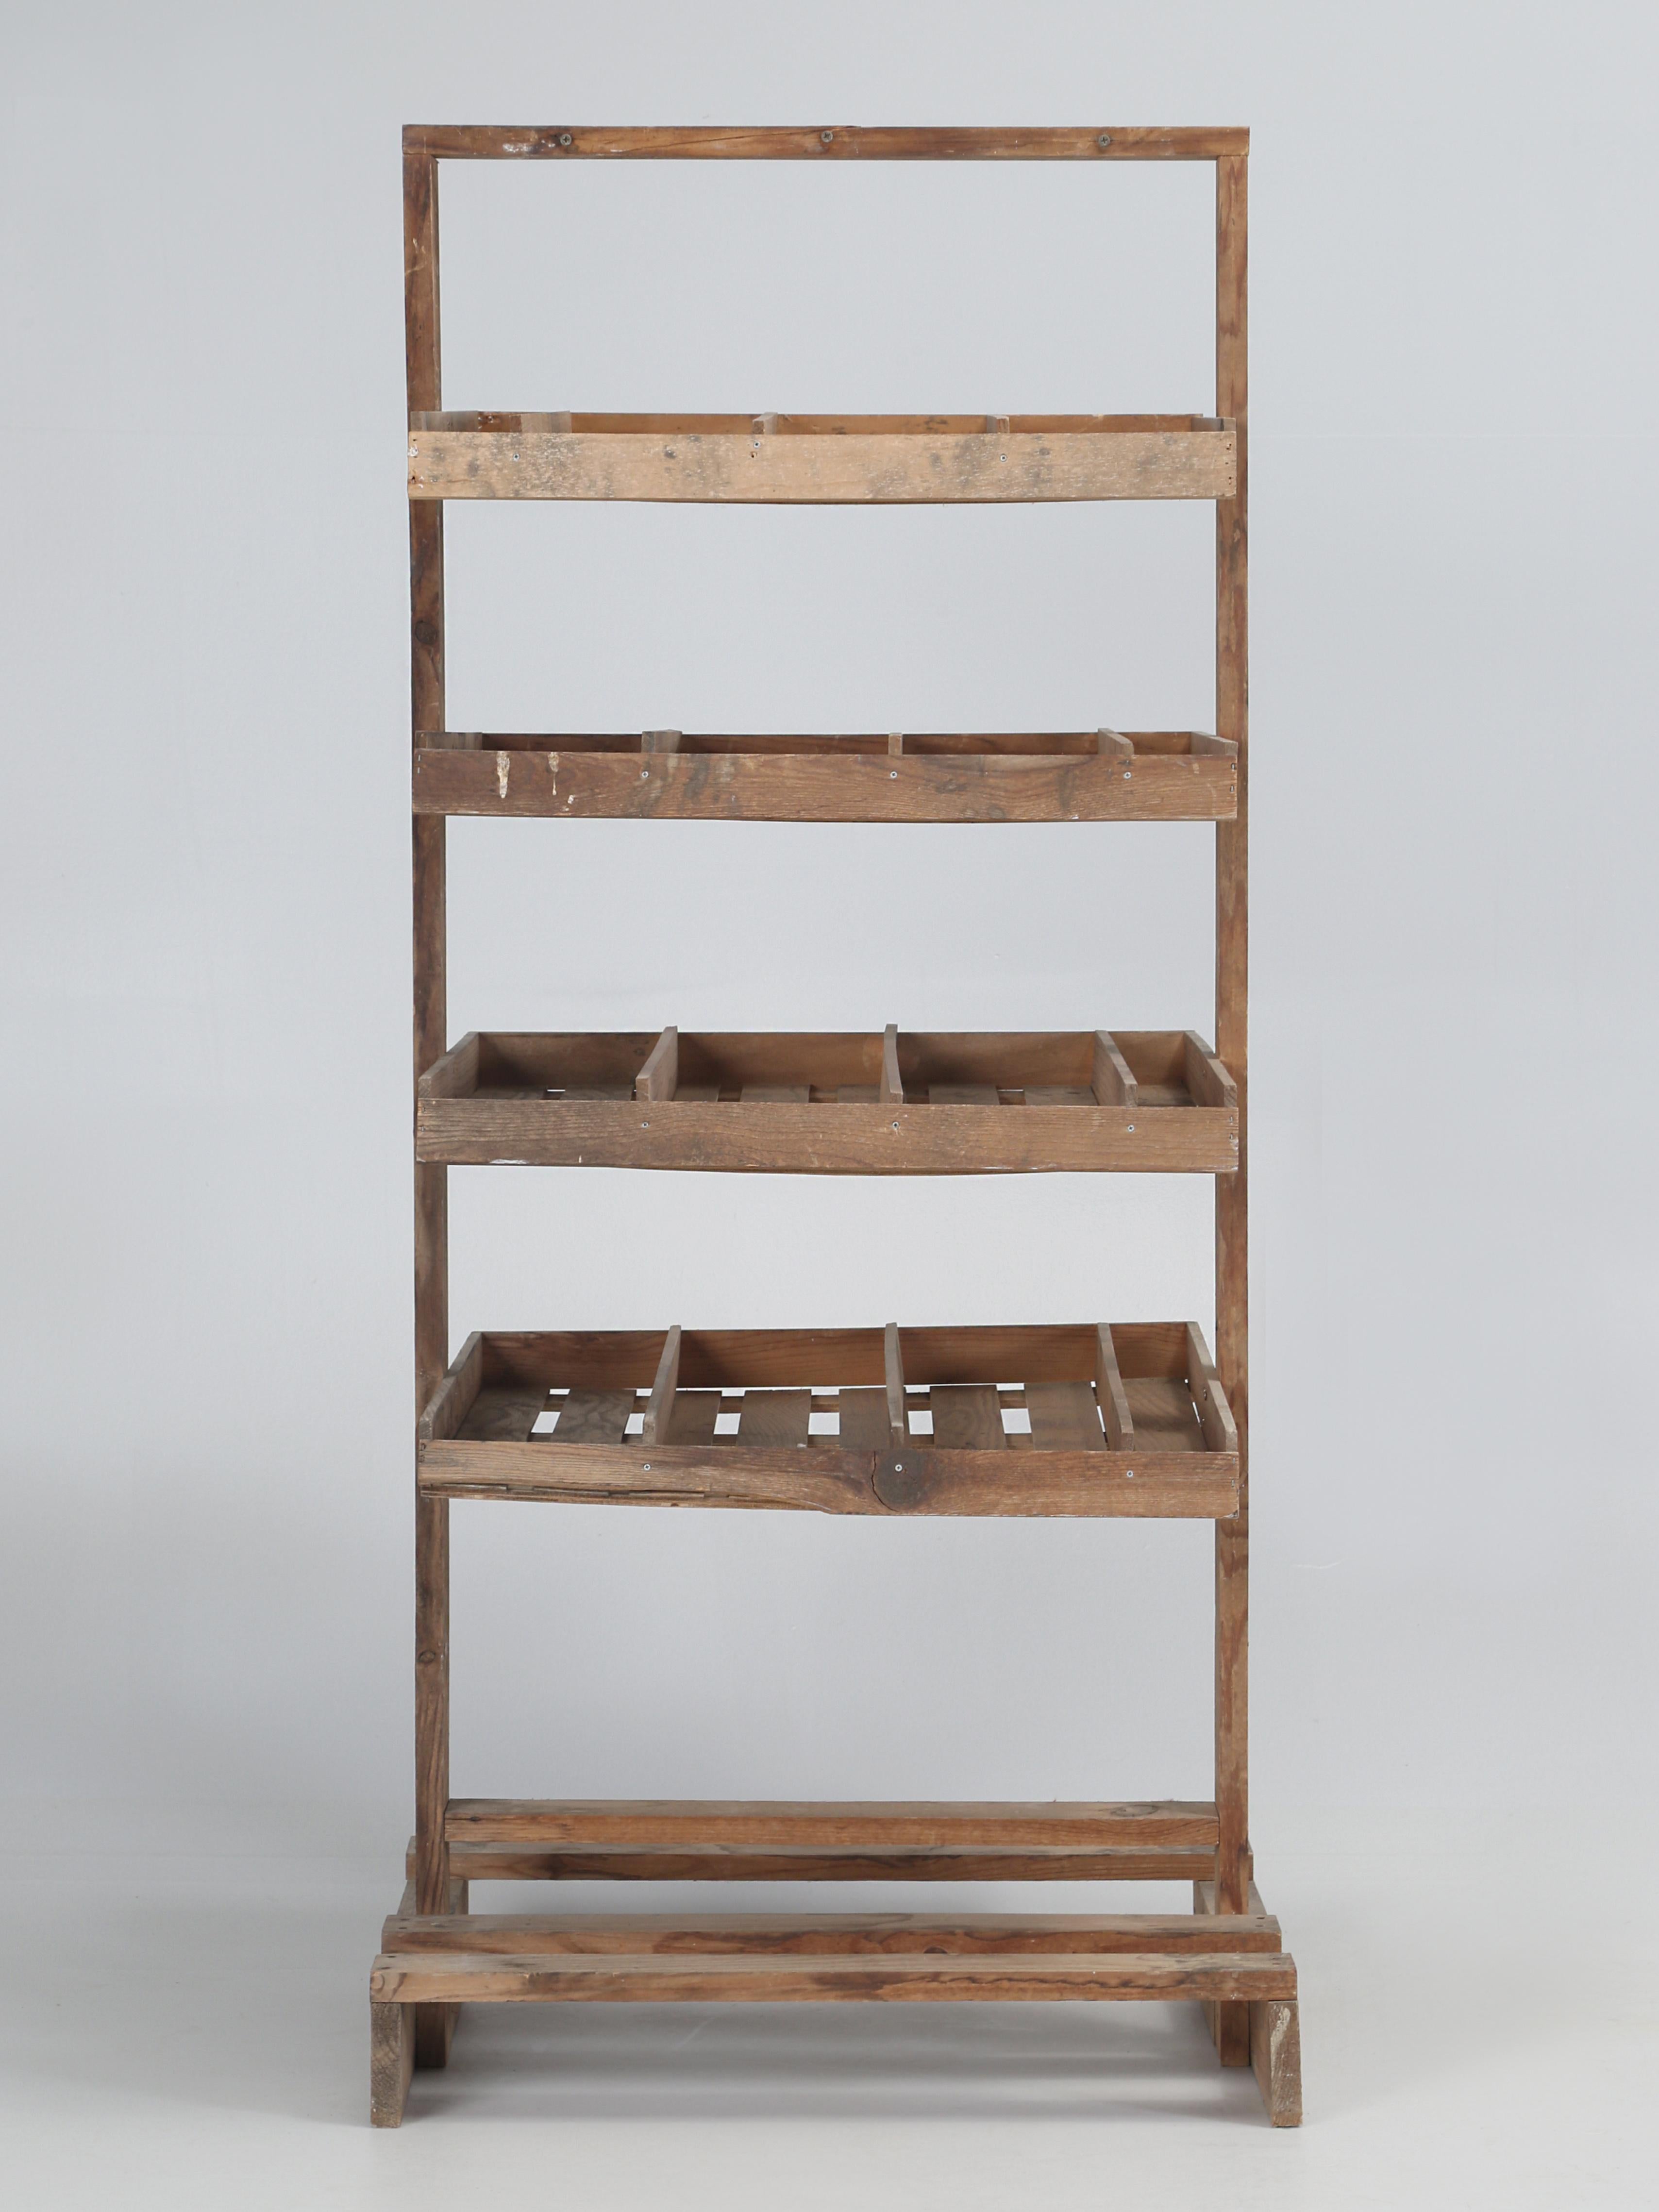 Antique European Drying Rack and was probably for Fruit would be our best guess. We thought the Drying Rack would be great for small herbs or flowering plants, or possibly a wonderful magazine rack. 
**Please note repair and the very top, images 3